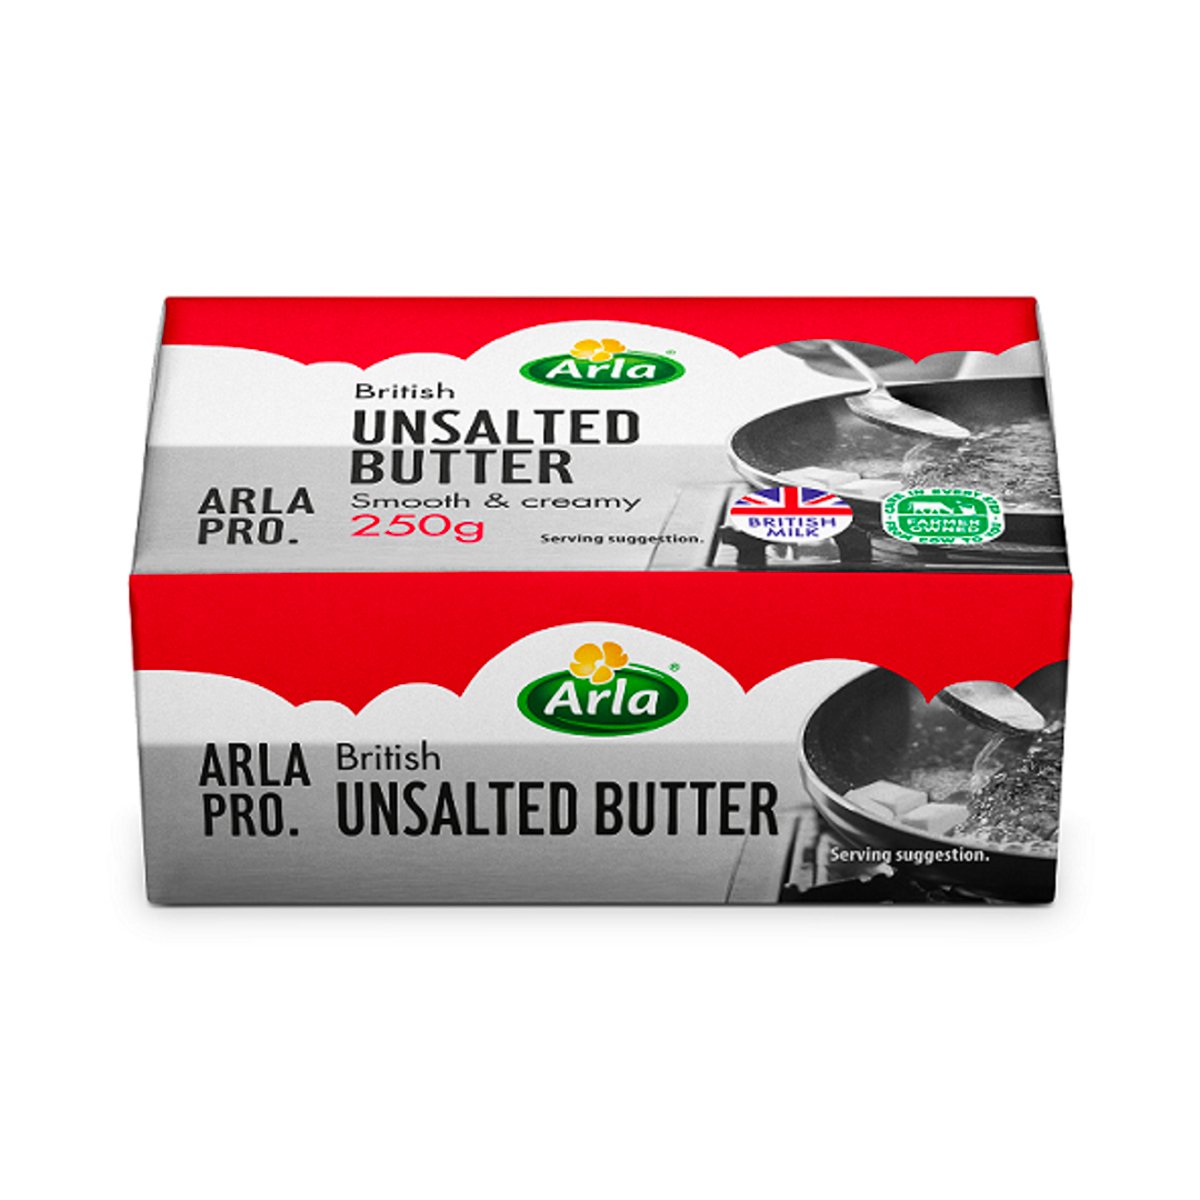 Arla British Unsalted Butter Smooth And Creamy 250g